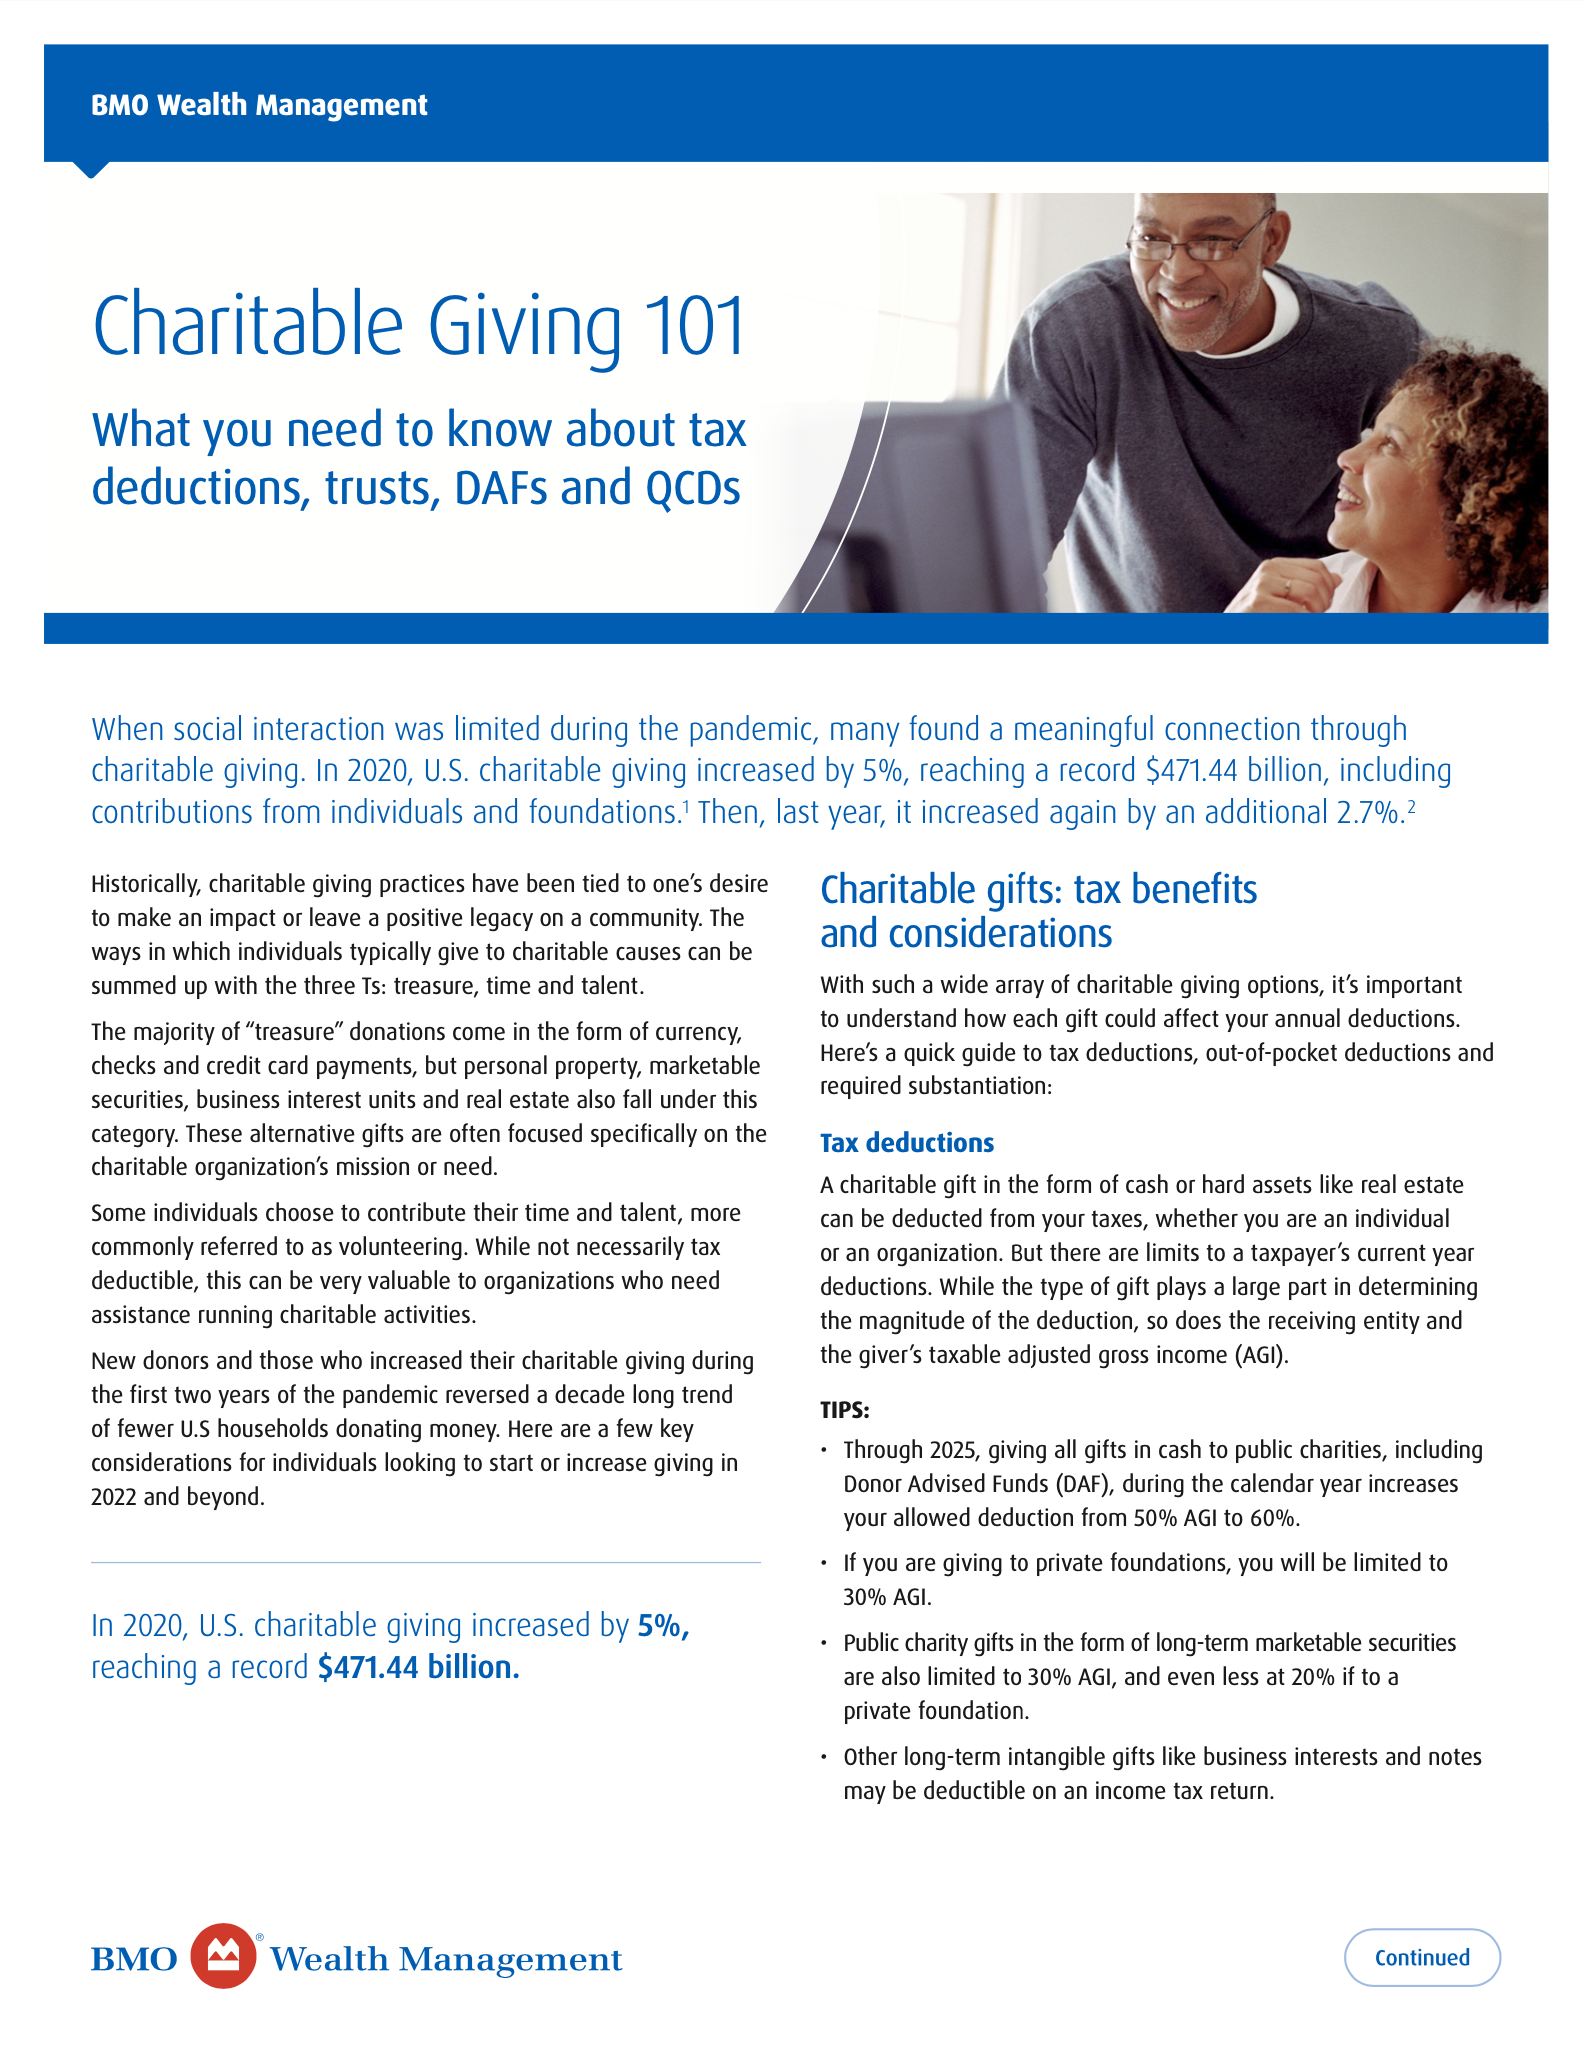 Charitable Giving 101 - BMO Wealth Management